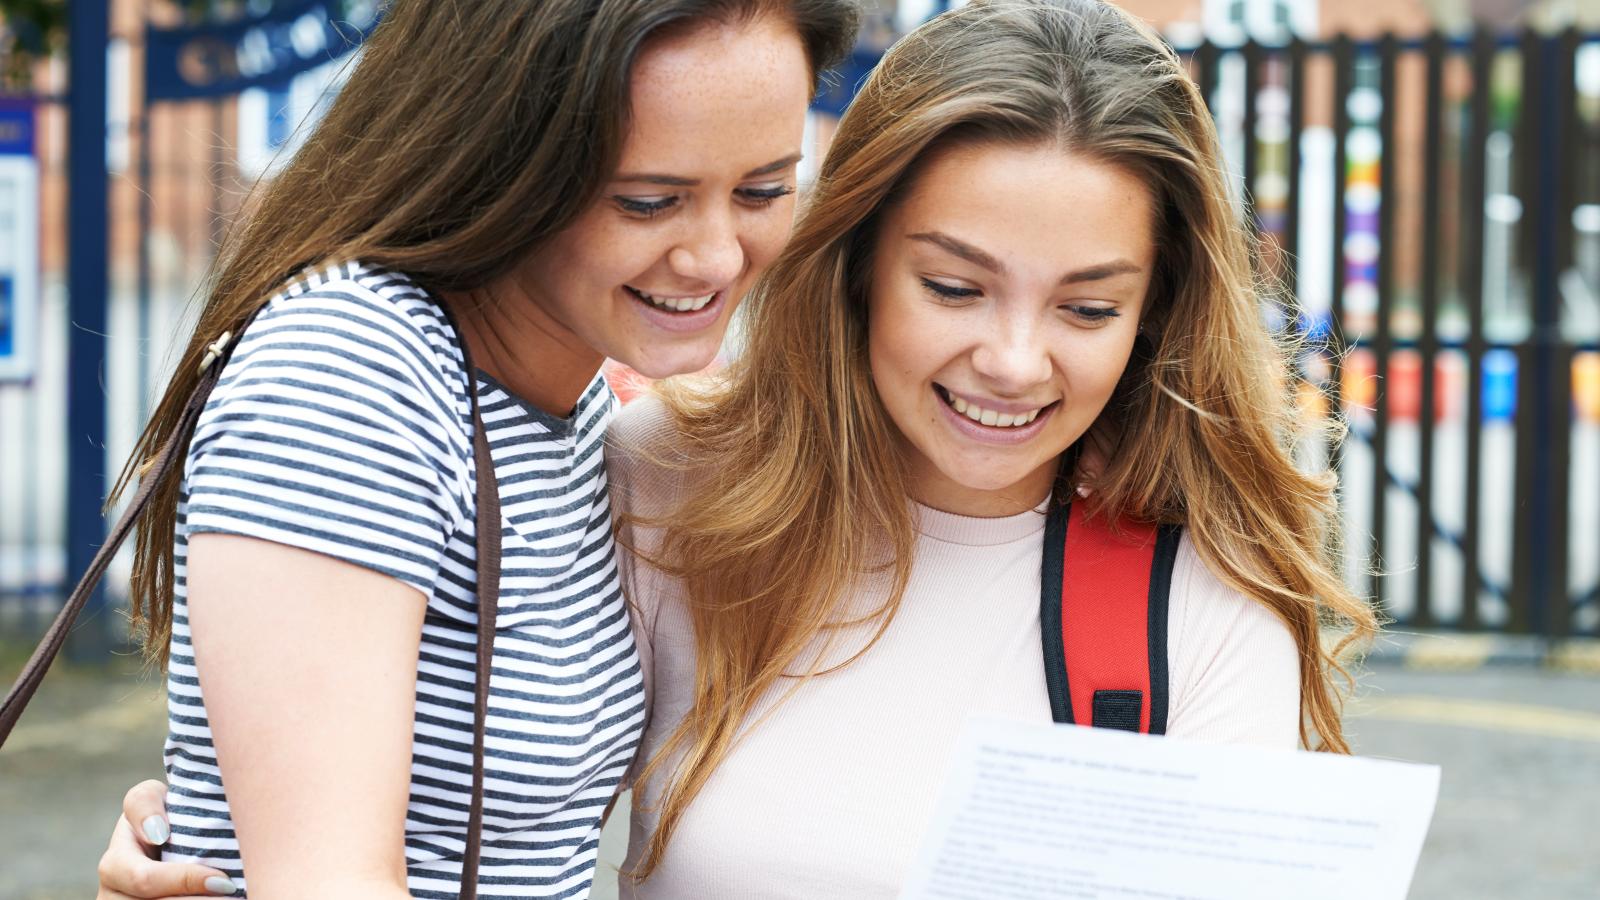 Two girls looking at page containing exam results